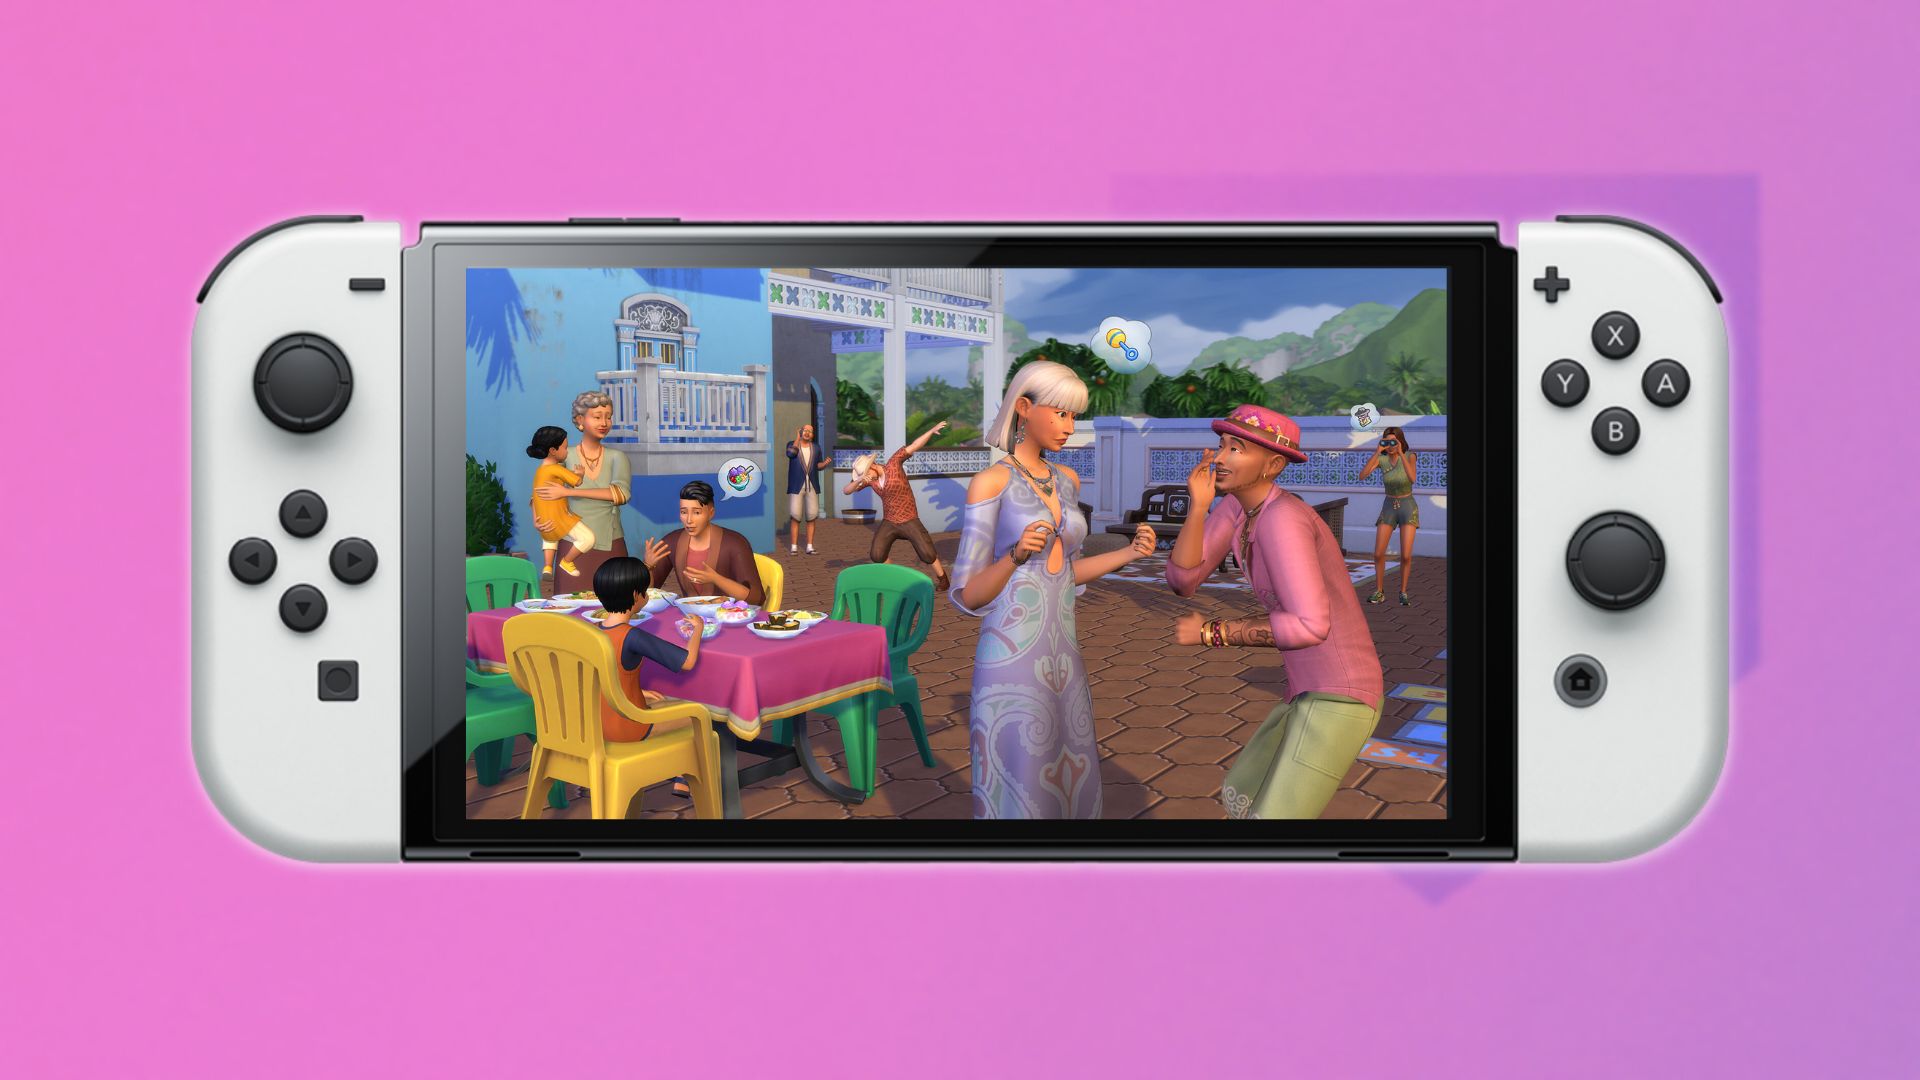 Here is how anyone can get The Sims 2 Ultimate Edition for free